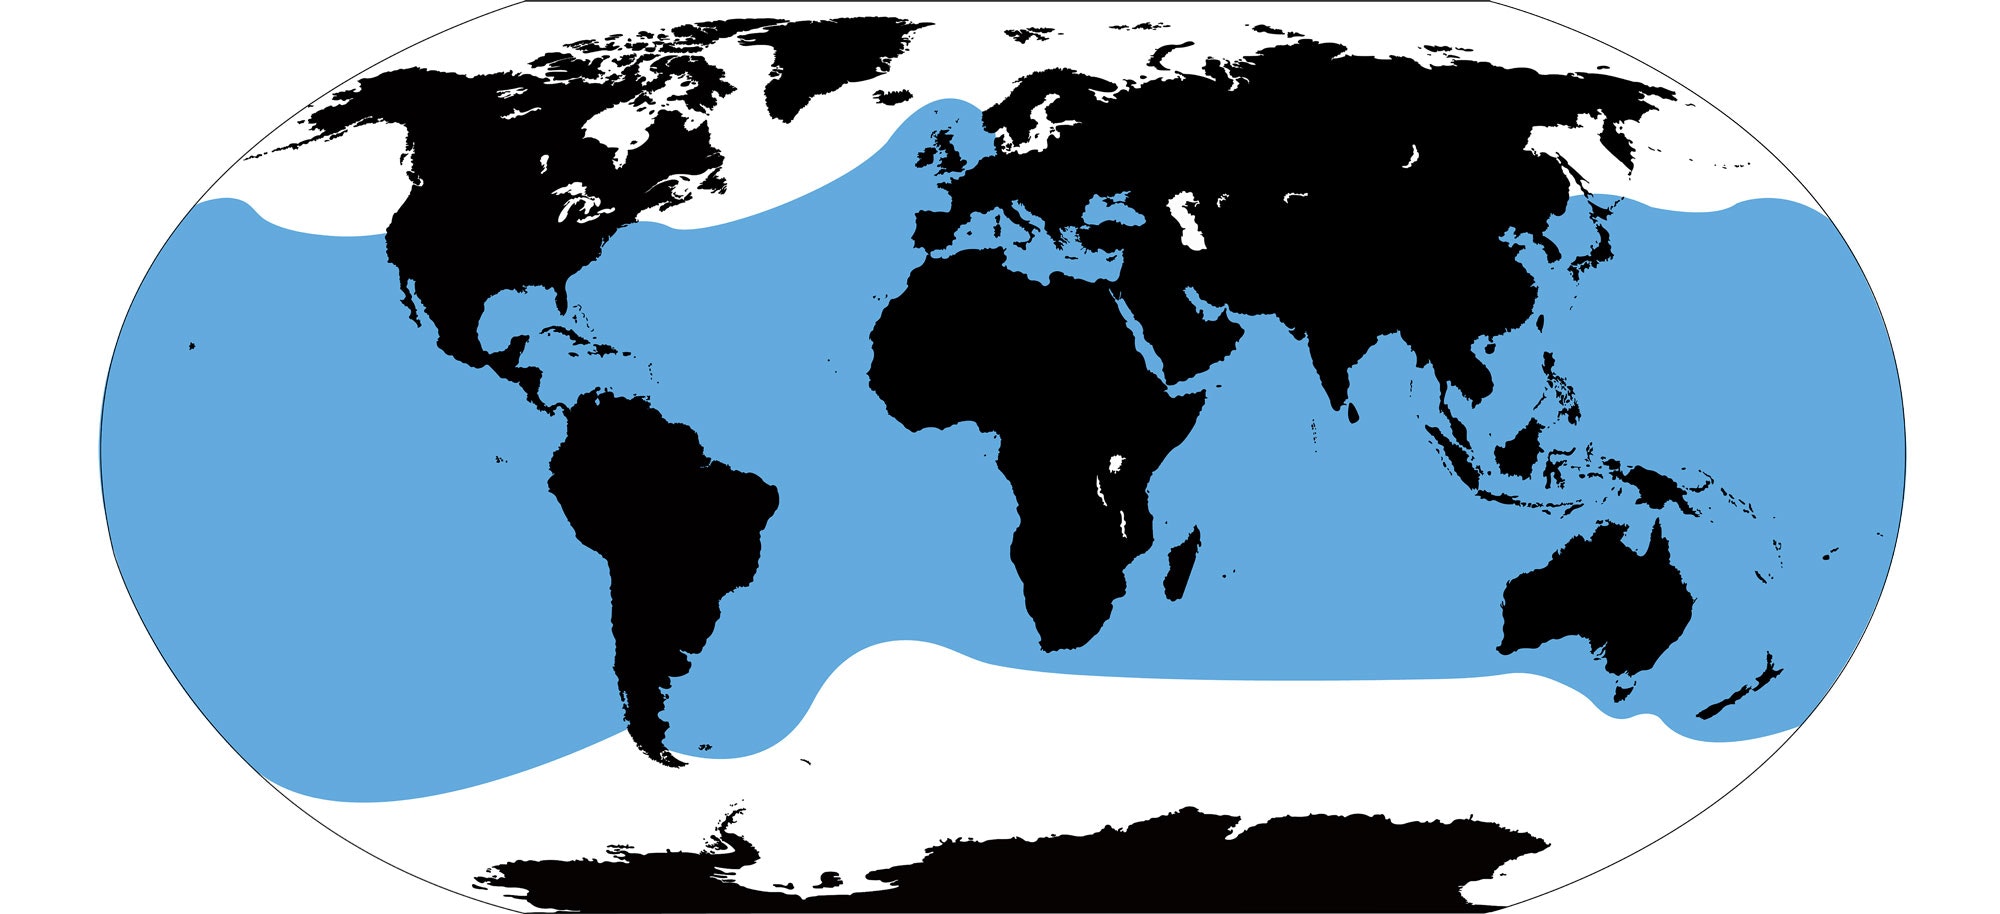 Map of the world showing with a blue wave through part of the oceans